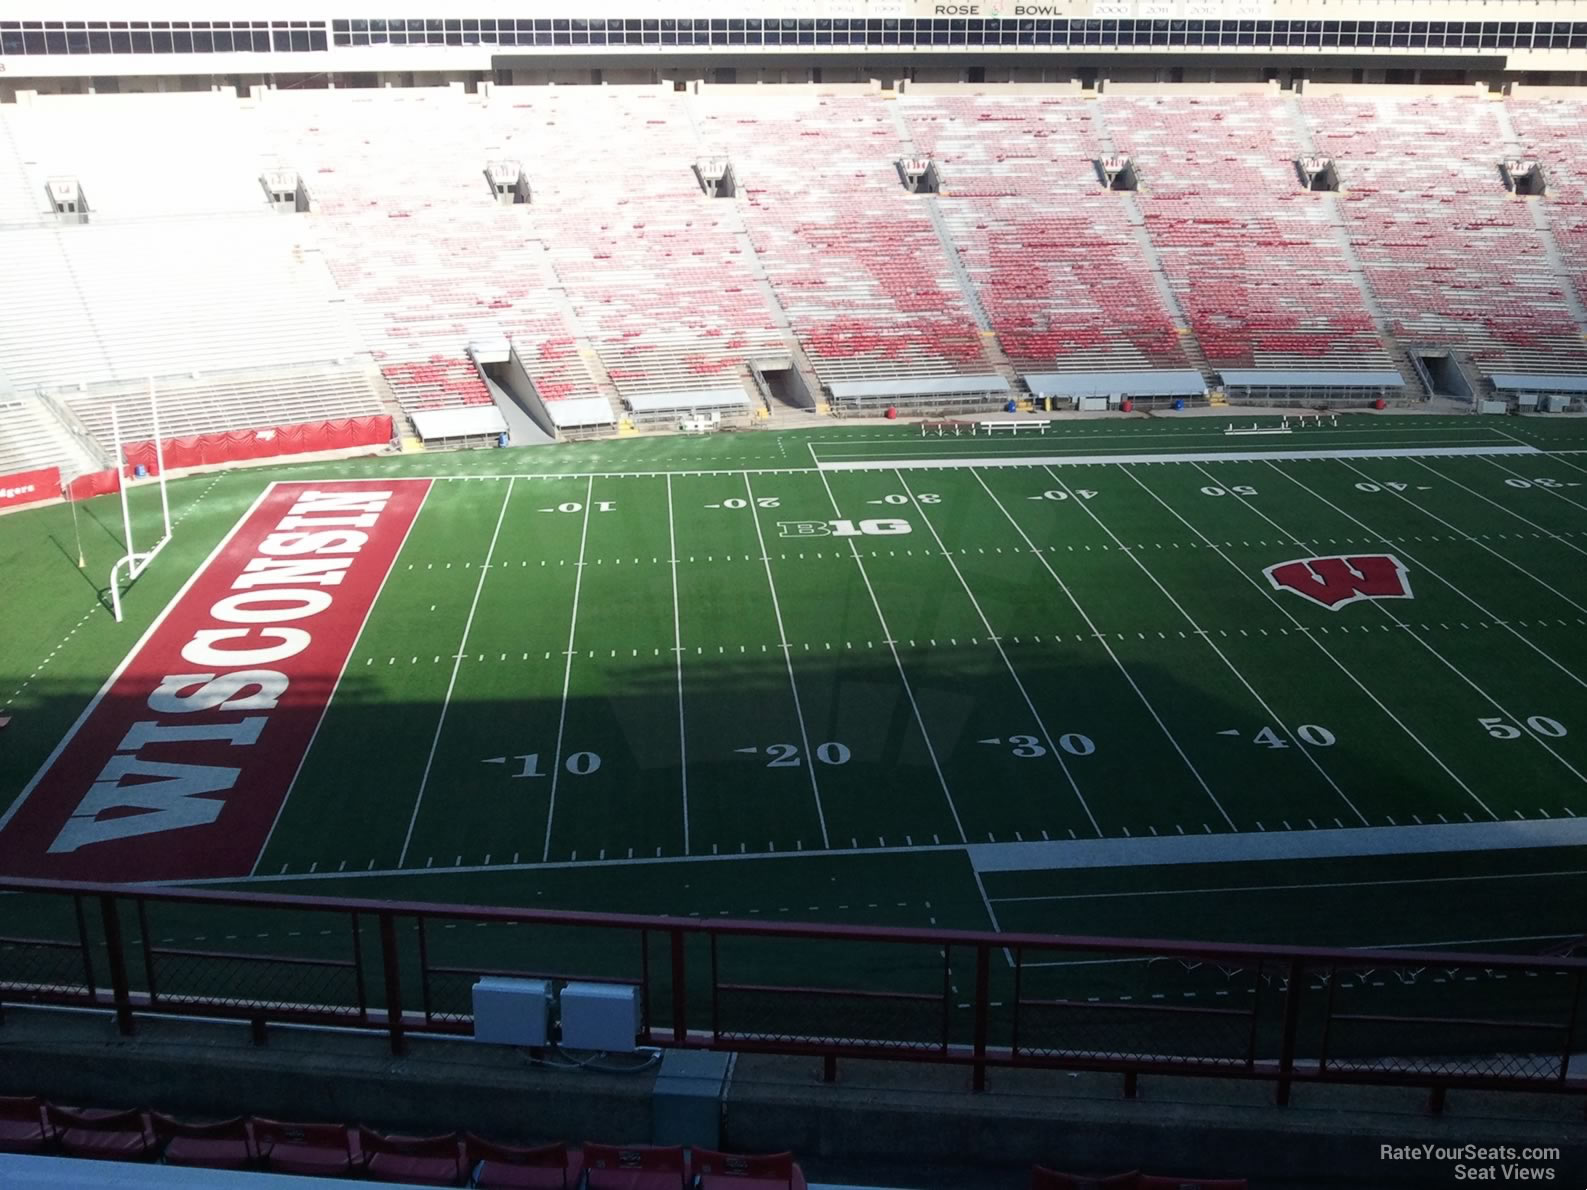 section hh, row 10 seat view  - camp randall stadium